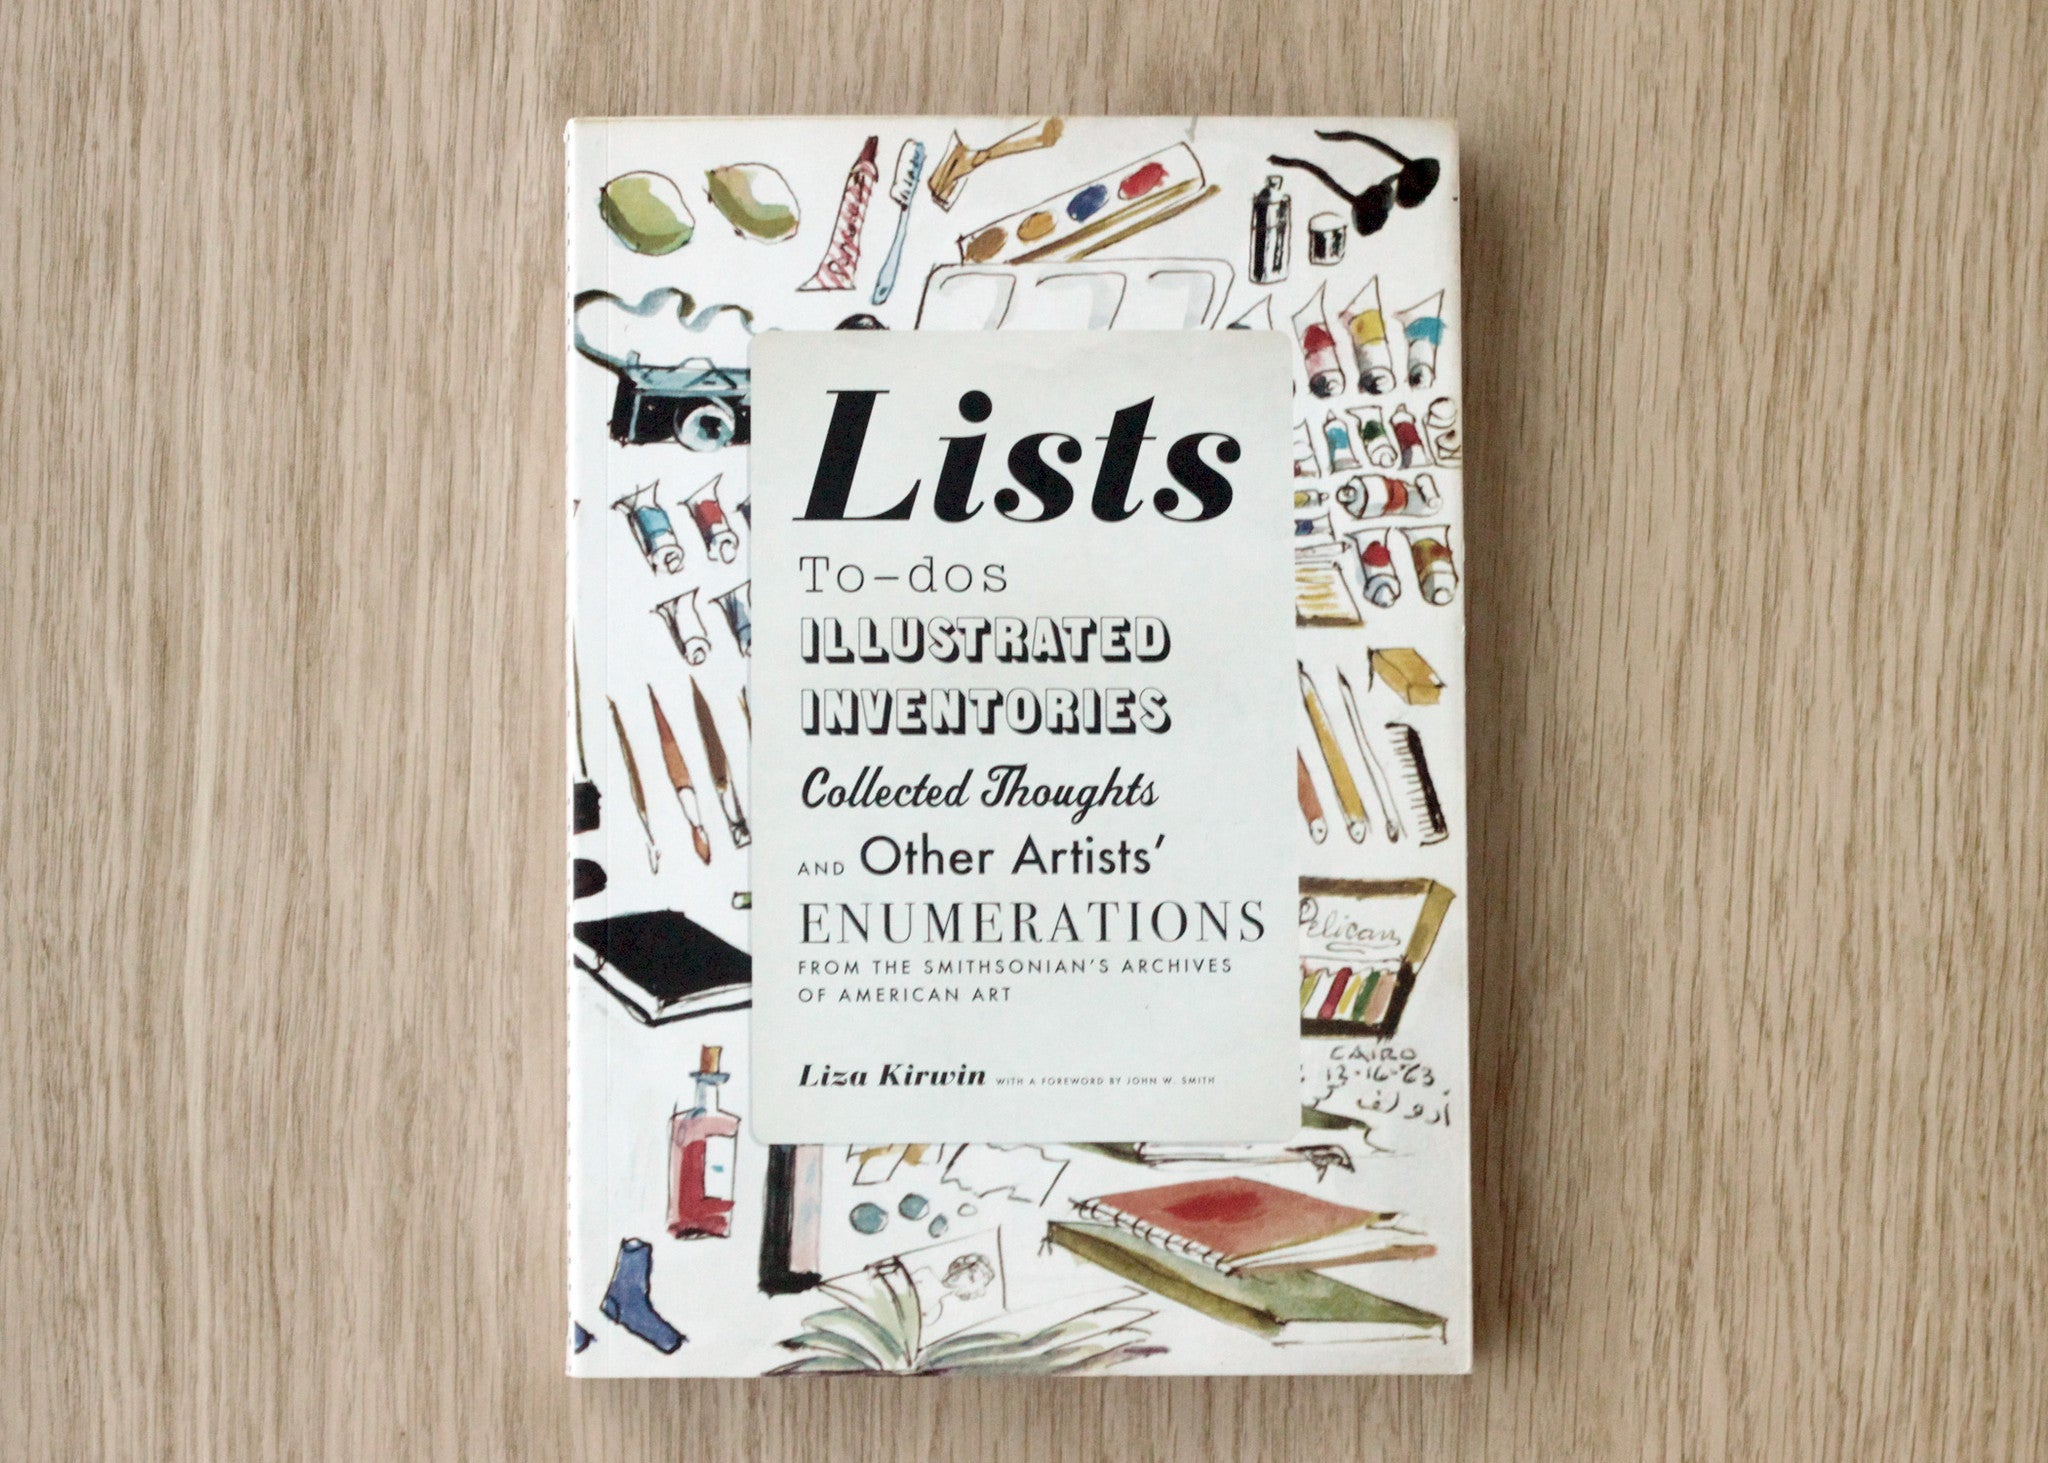 LISTS: To-dos, Illustrated Inventories, Collected Thoughts, and Other Artists' Enumerations from the Collections of the Smithsonian Museum